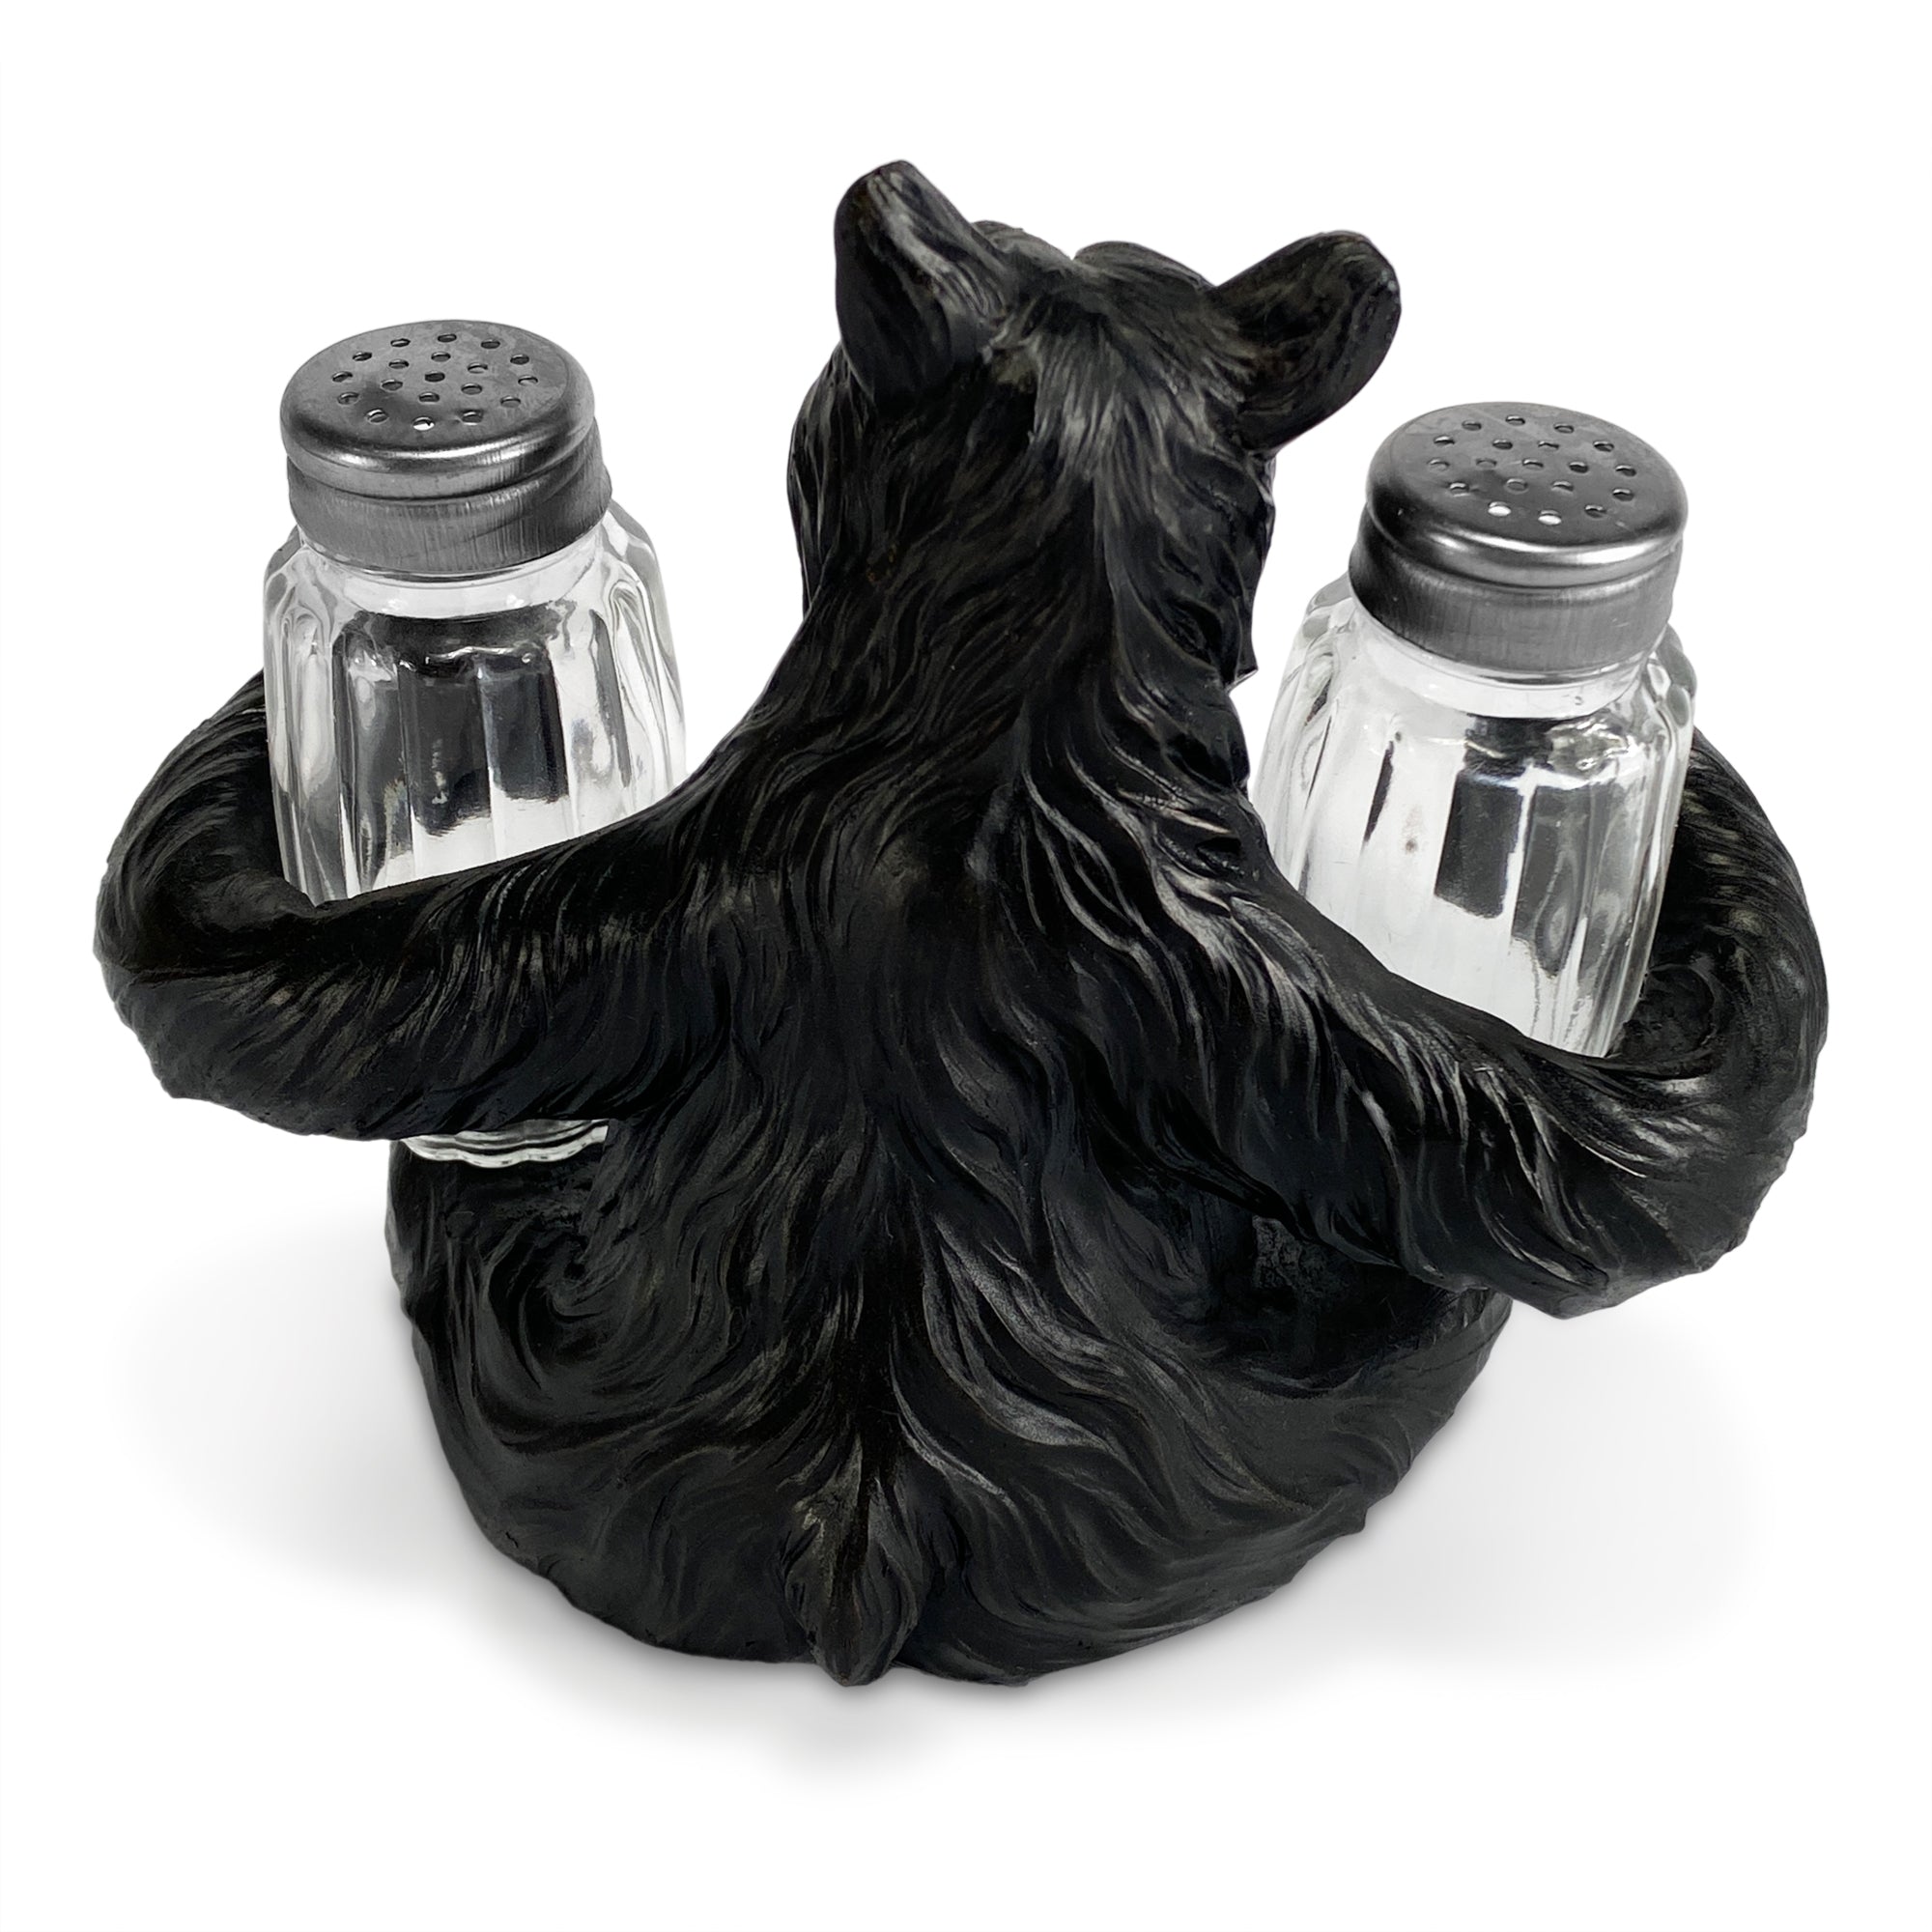 The Rogue Valley Pepper Shakers